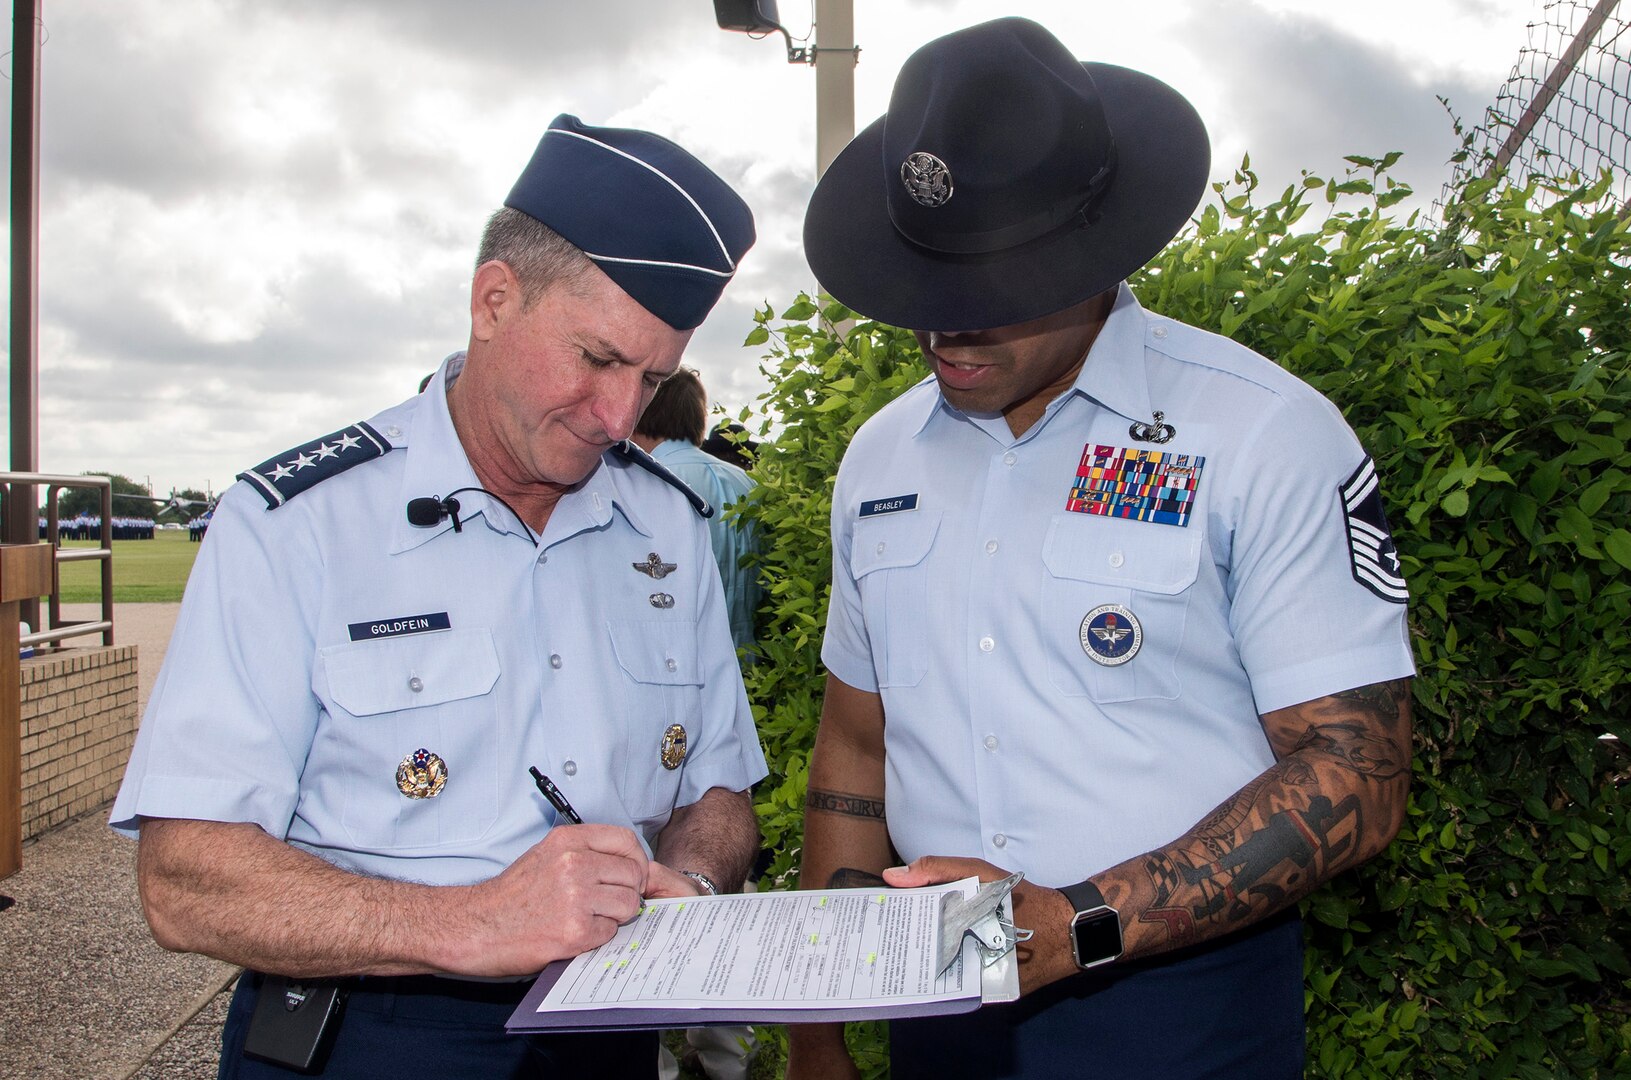 Air Force Chief of Staff Gen. David Goldfein, signs oath of enlistment paperwork for Senior Master Sgt. Steven Beasley, 737th Training Group superintendent of standardization and evaluation, prior to the start of basic military training graduation June 16, 2017, at Joint Base San Antonio-Lackland. Goldfein toured various JBSA-Lackland facilities and met many 37th Training Wing Airmen during his two-day visit. Beasley joined BMT Airmen in reciting the oath as Goldfein administered during the graduation. (U.S. Air Force photo by Johnny Saldivar)